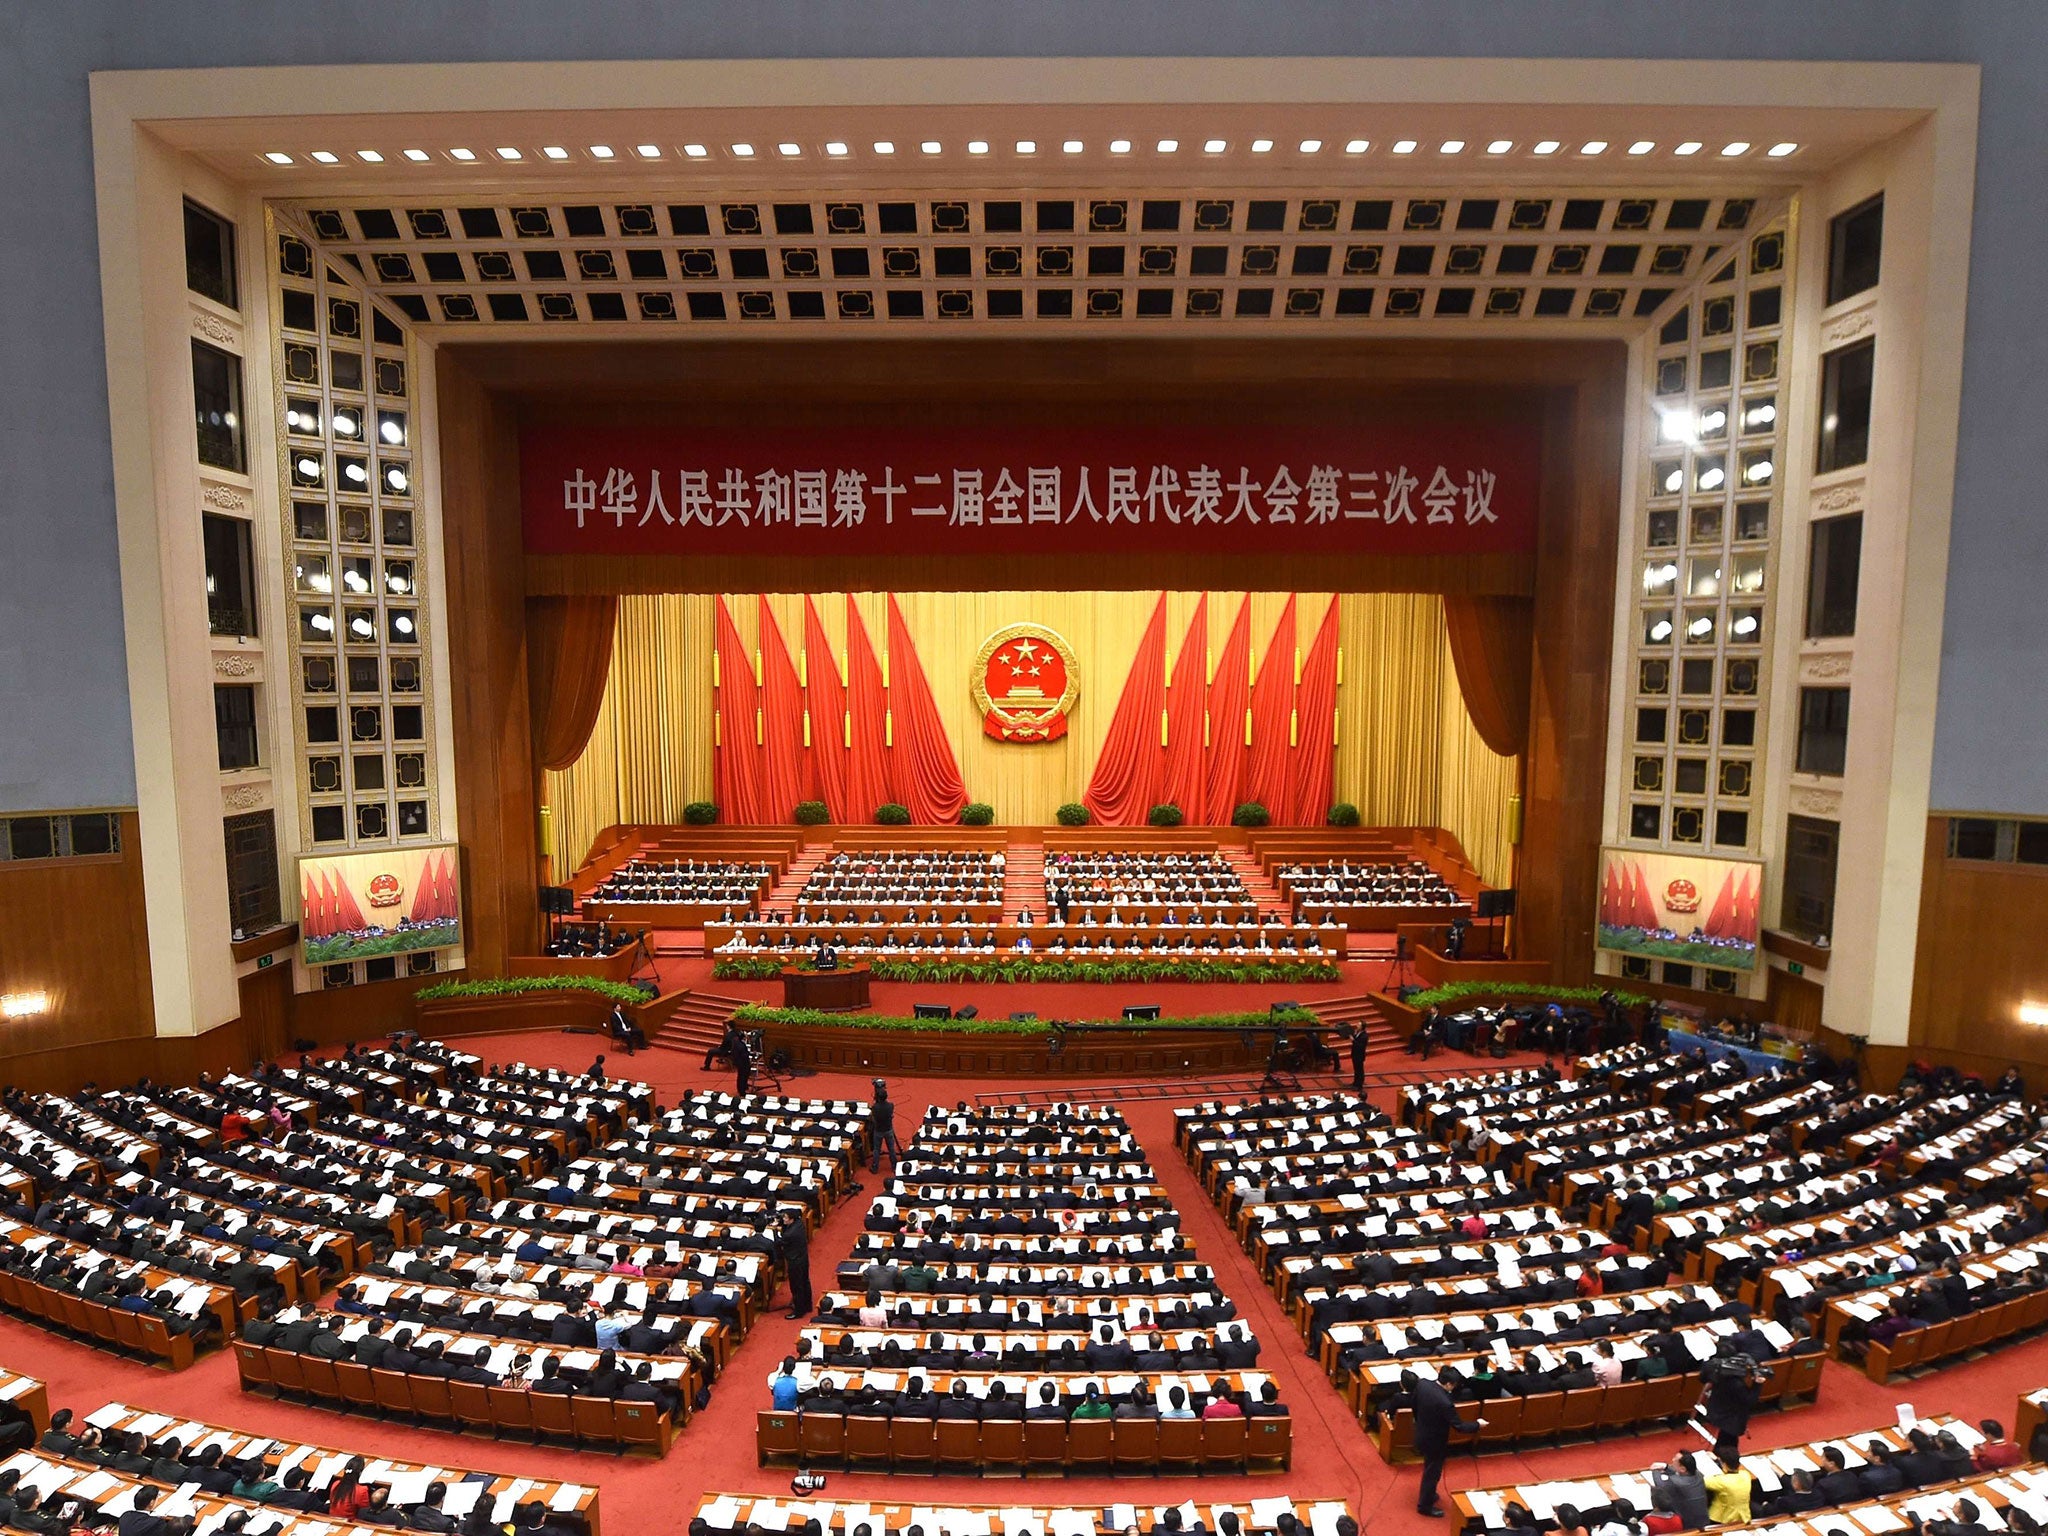 A general view shows the third session of the 12th National People's Congress at the Great Hall of the People in Beijing on March 8, 2015.